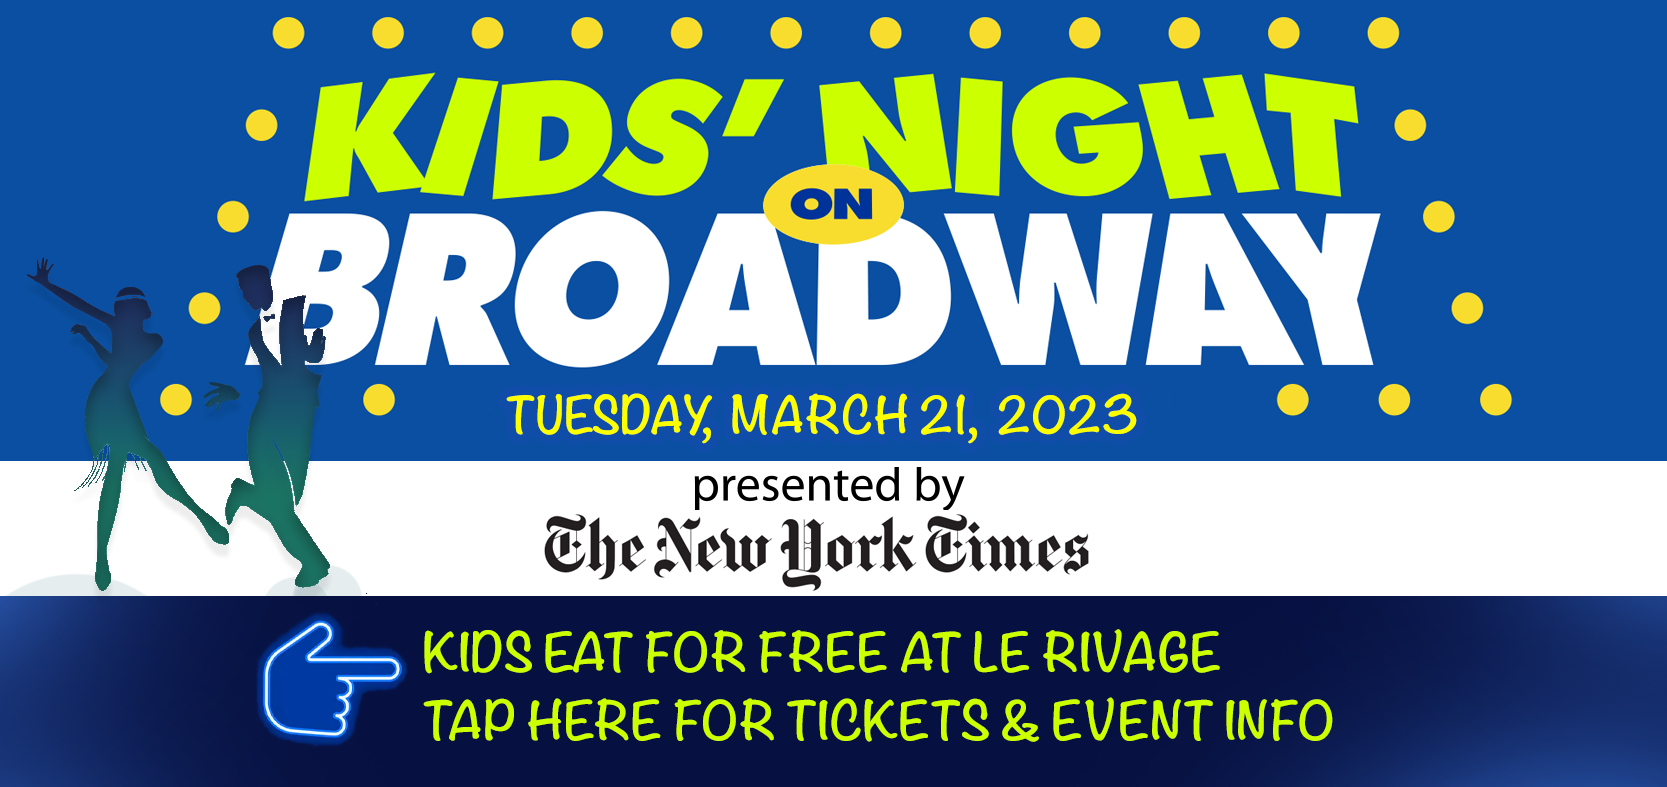 Kid's Night on Broadway on March 21, 2023, Kids Eat for Free! at Le Rivage. Call (212) 765-7374 to make a reservation